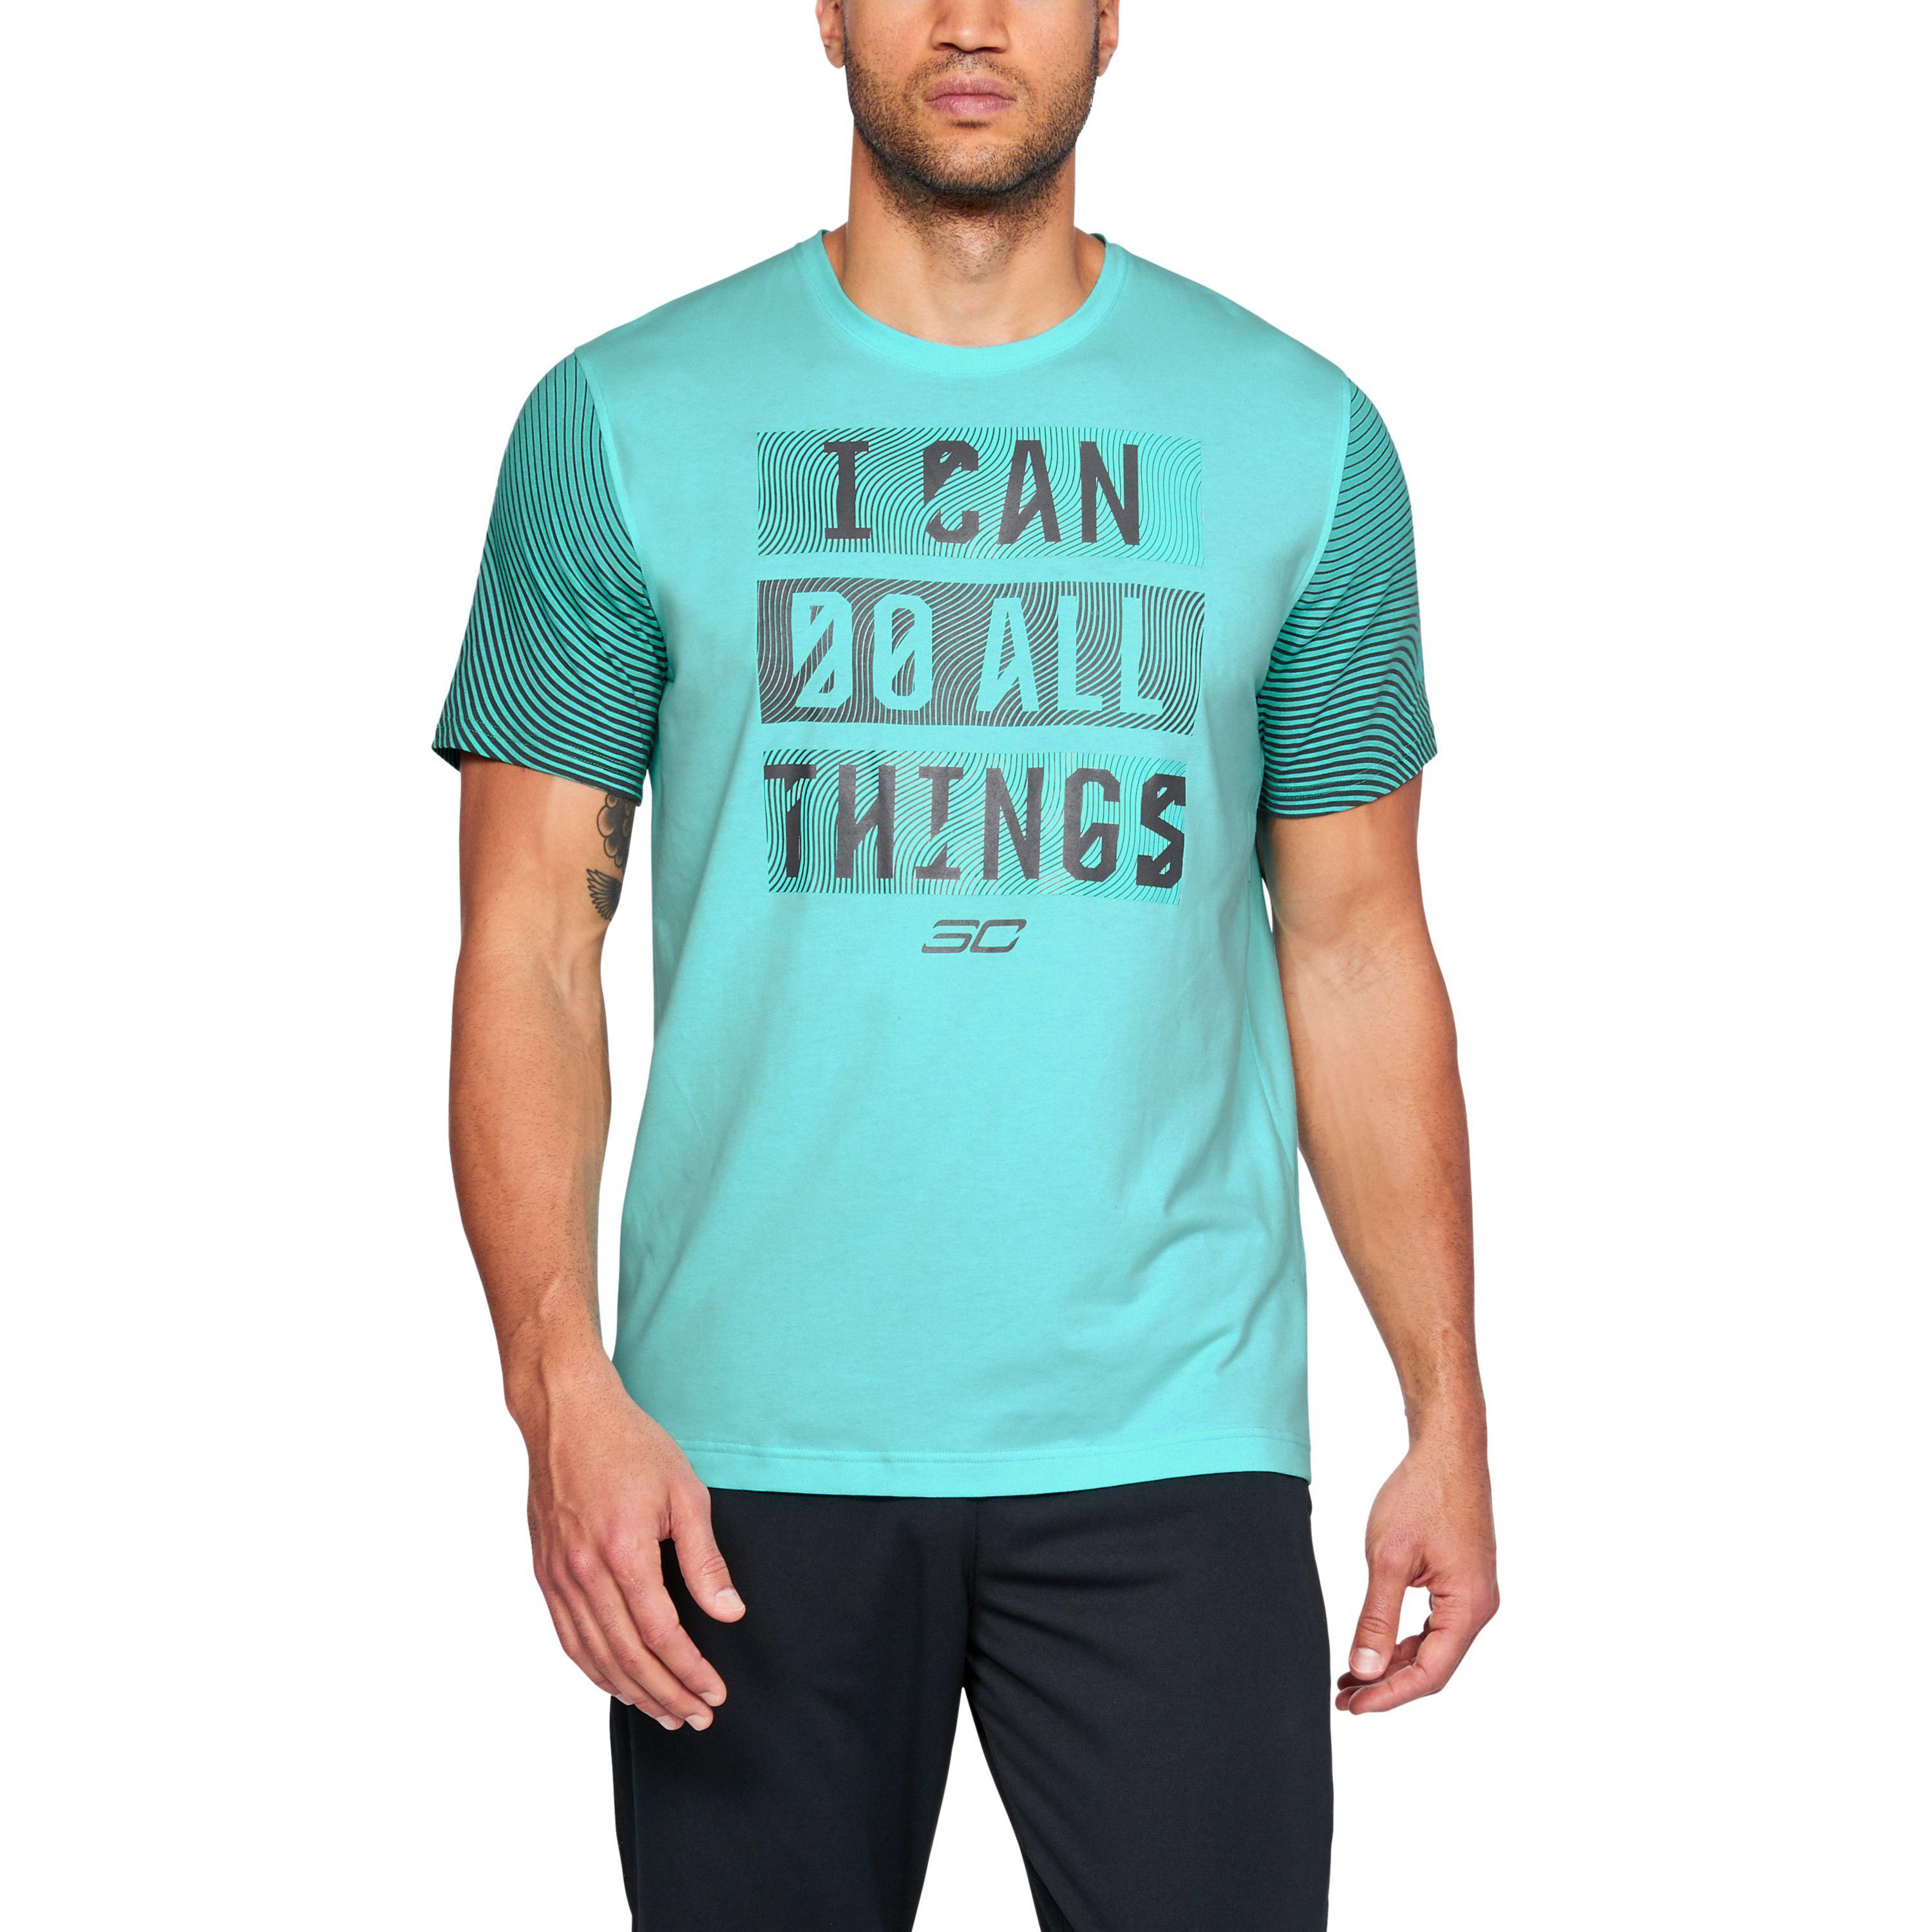 Under Armour Mens sc30 i can do All Things tee fw17